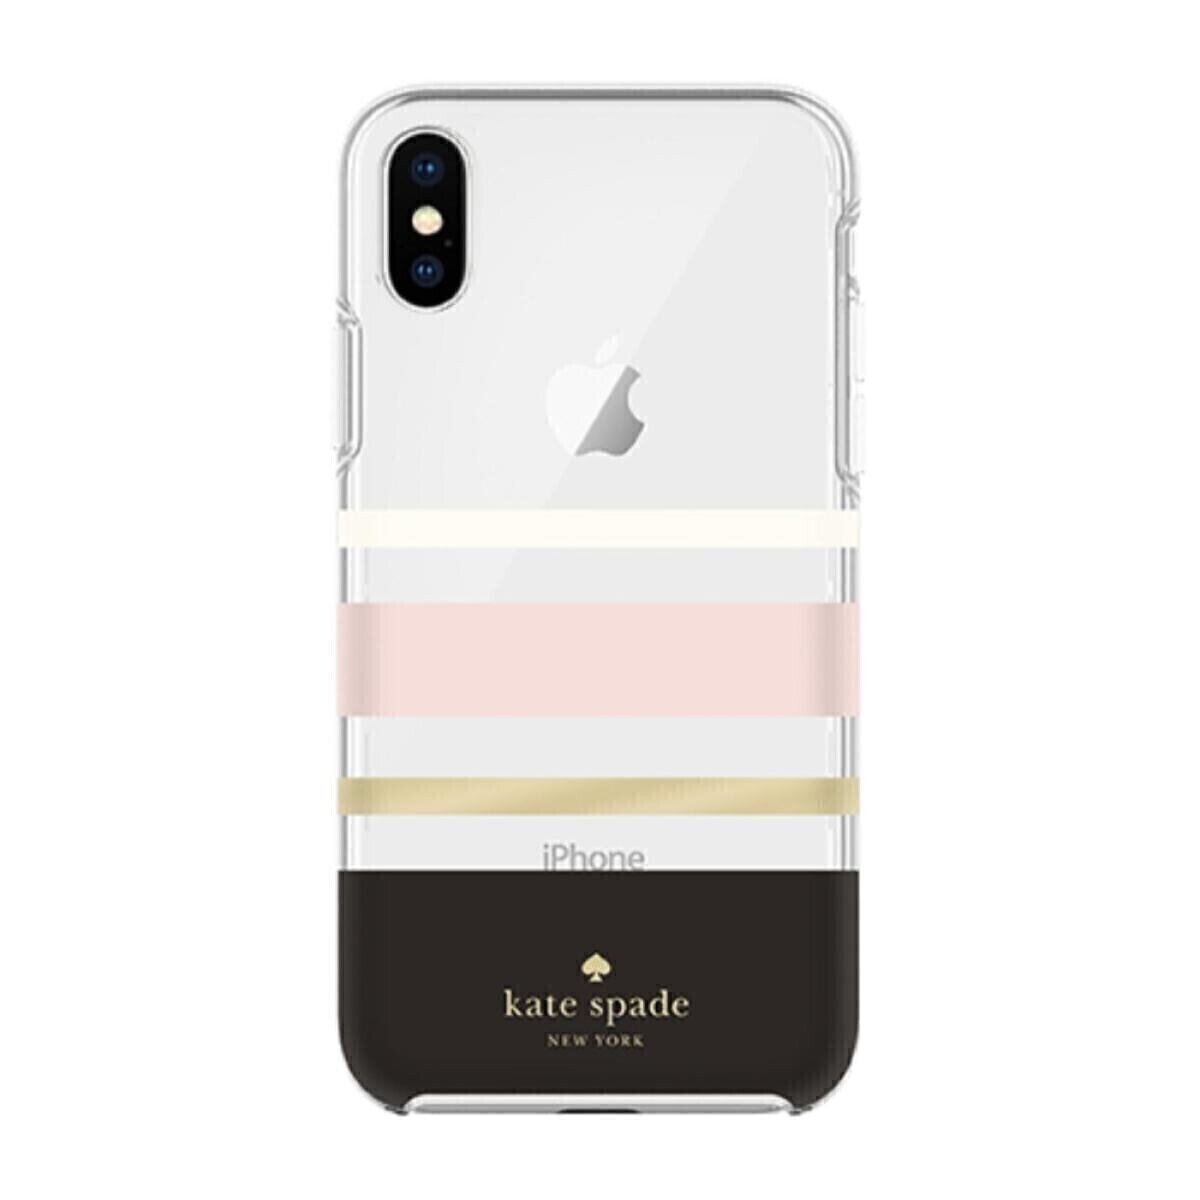 Kate Spade New York iPhone XR Protective Hardshell Case, Charlotte Stripe Gold Glitter/Clear (1 PC C